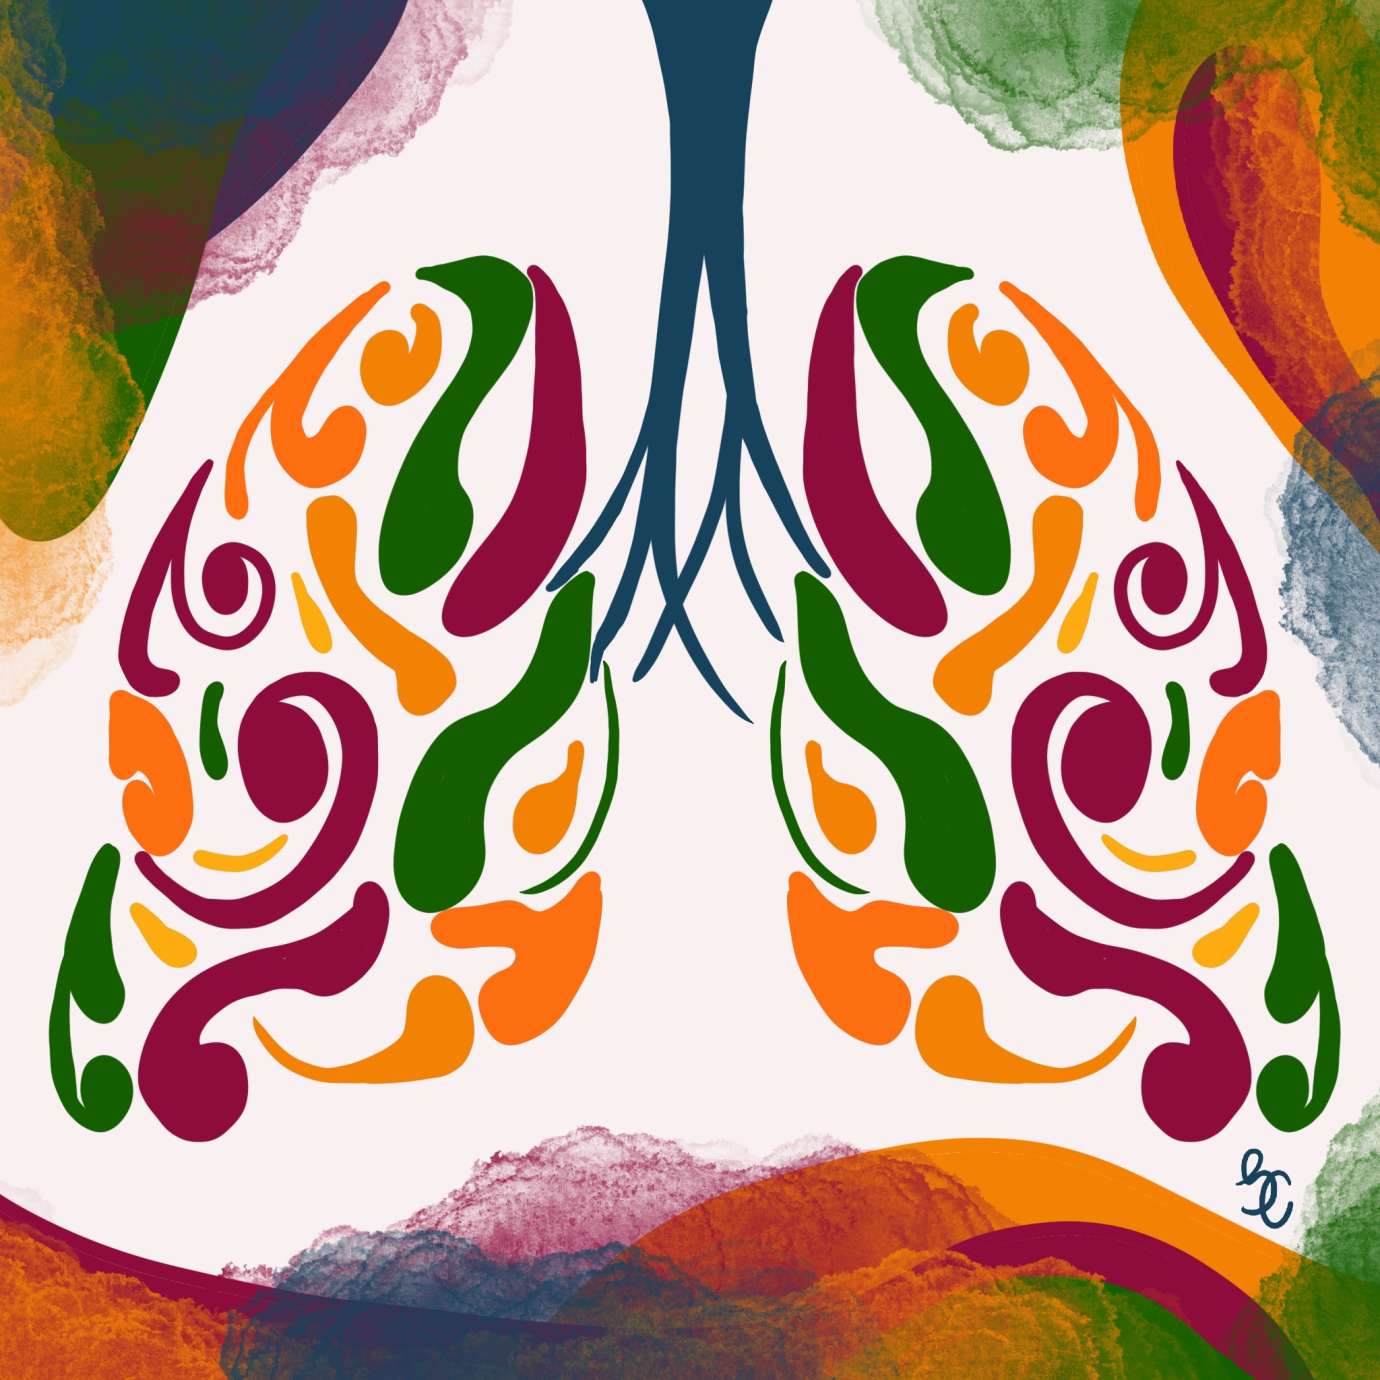 Two lungs colorfully illustrated by artist Mayanthi Jayawardena